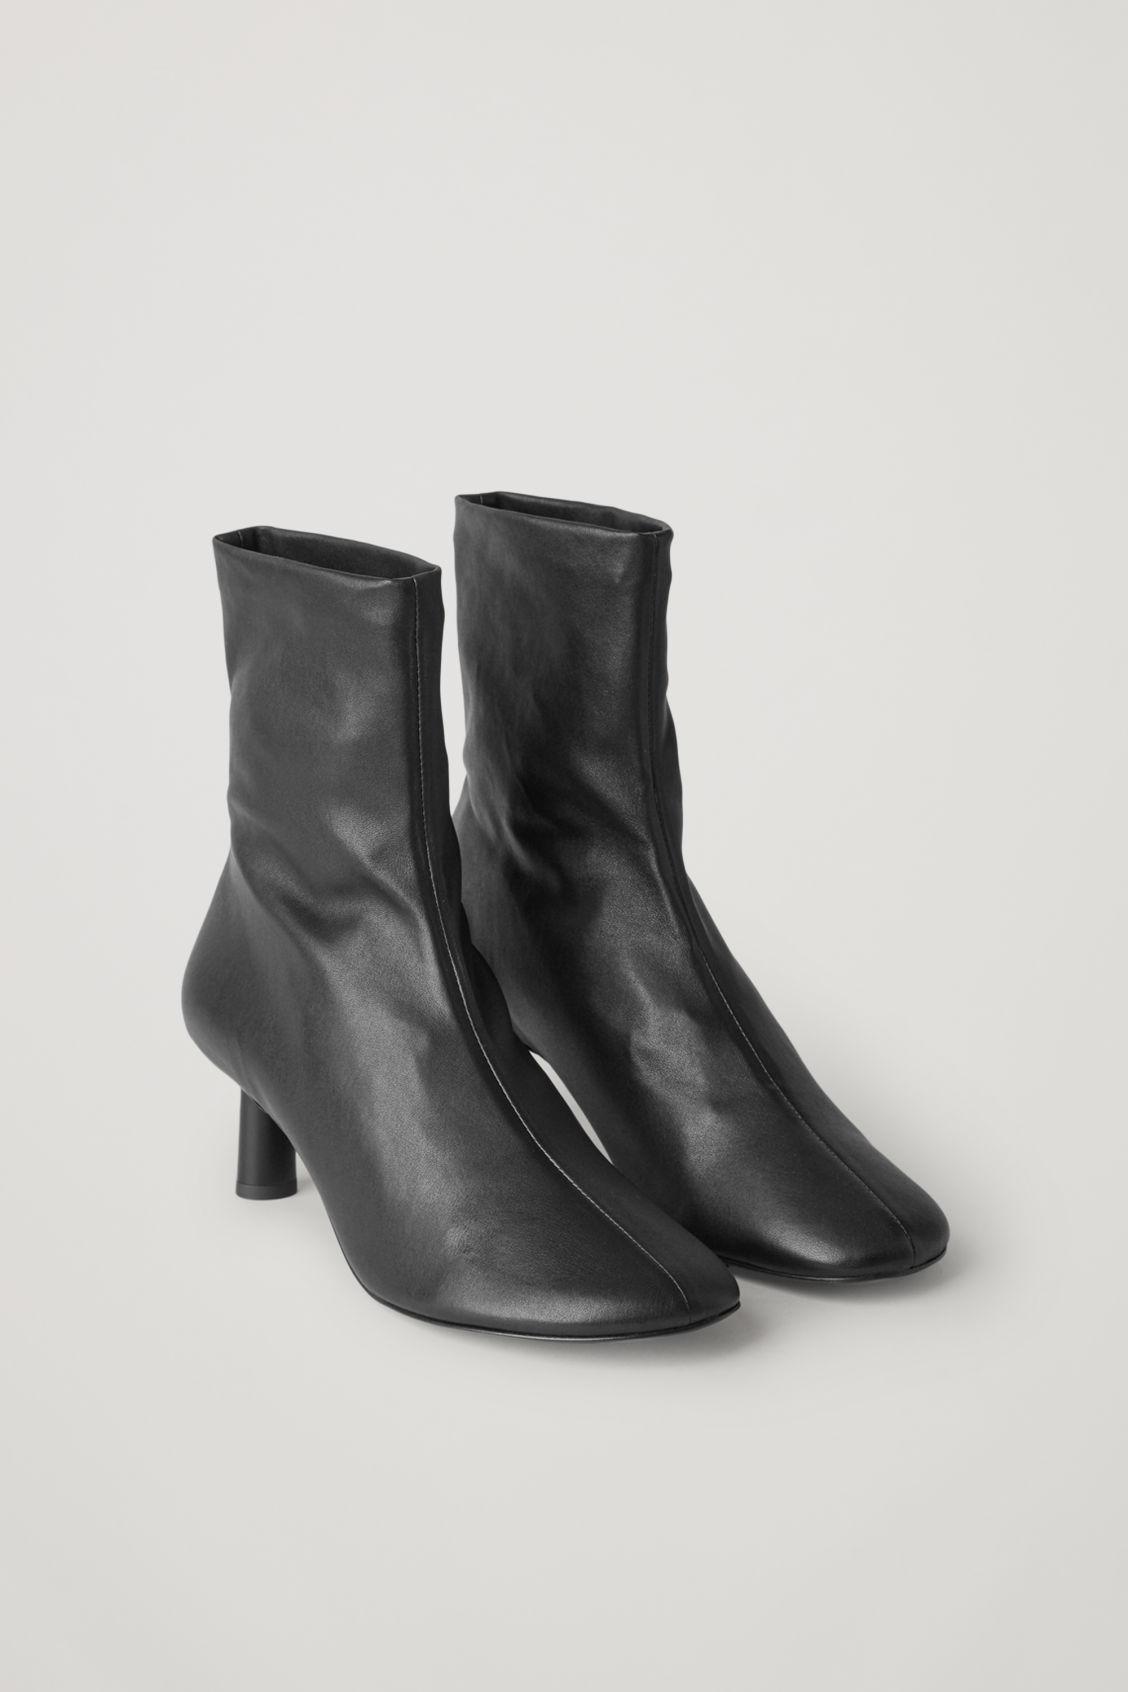 COS Leather Ankle Boots in Black | Lyst